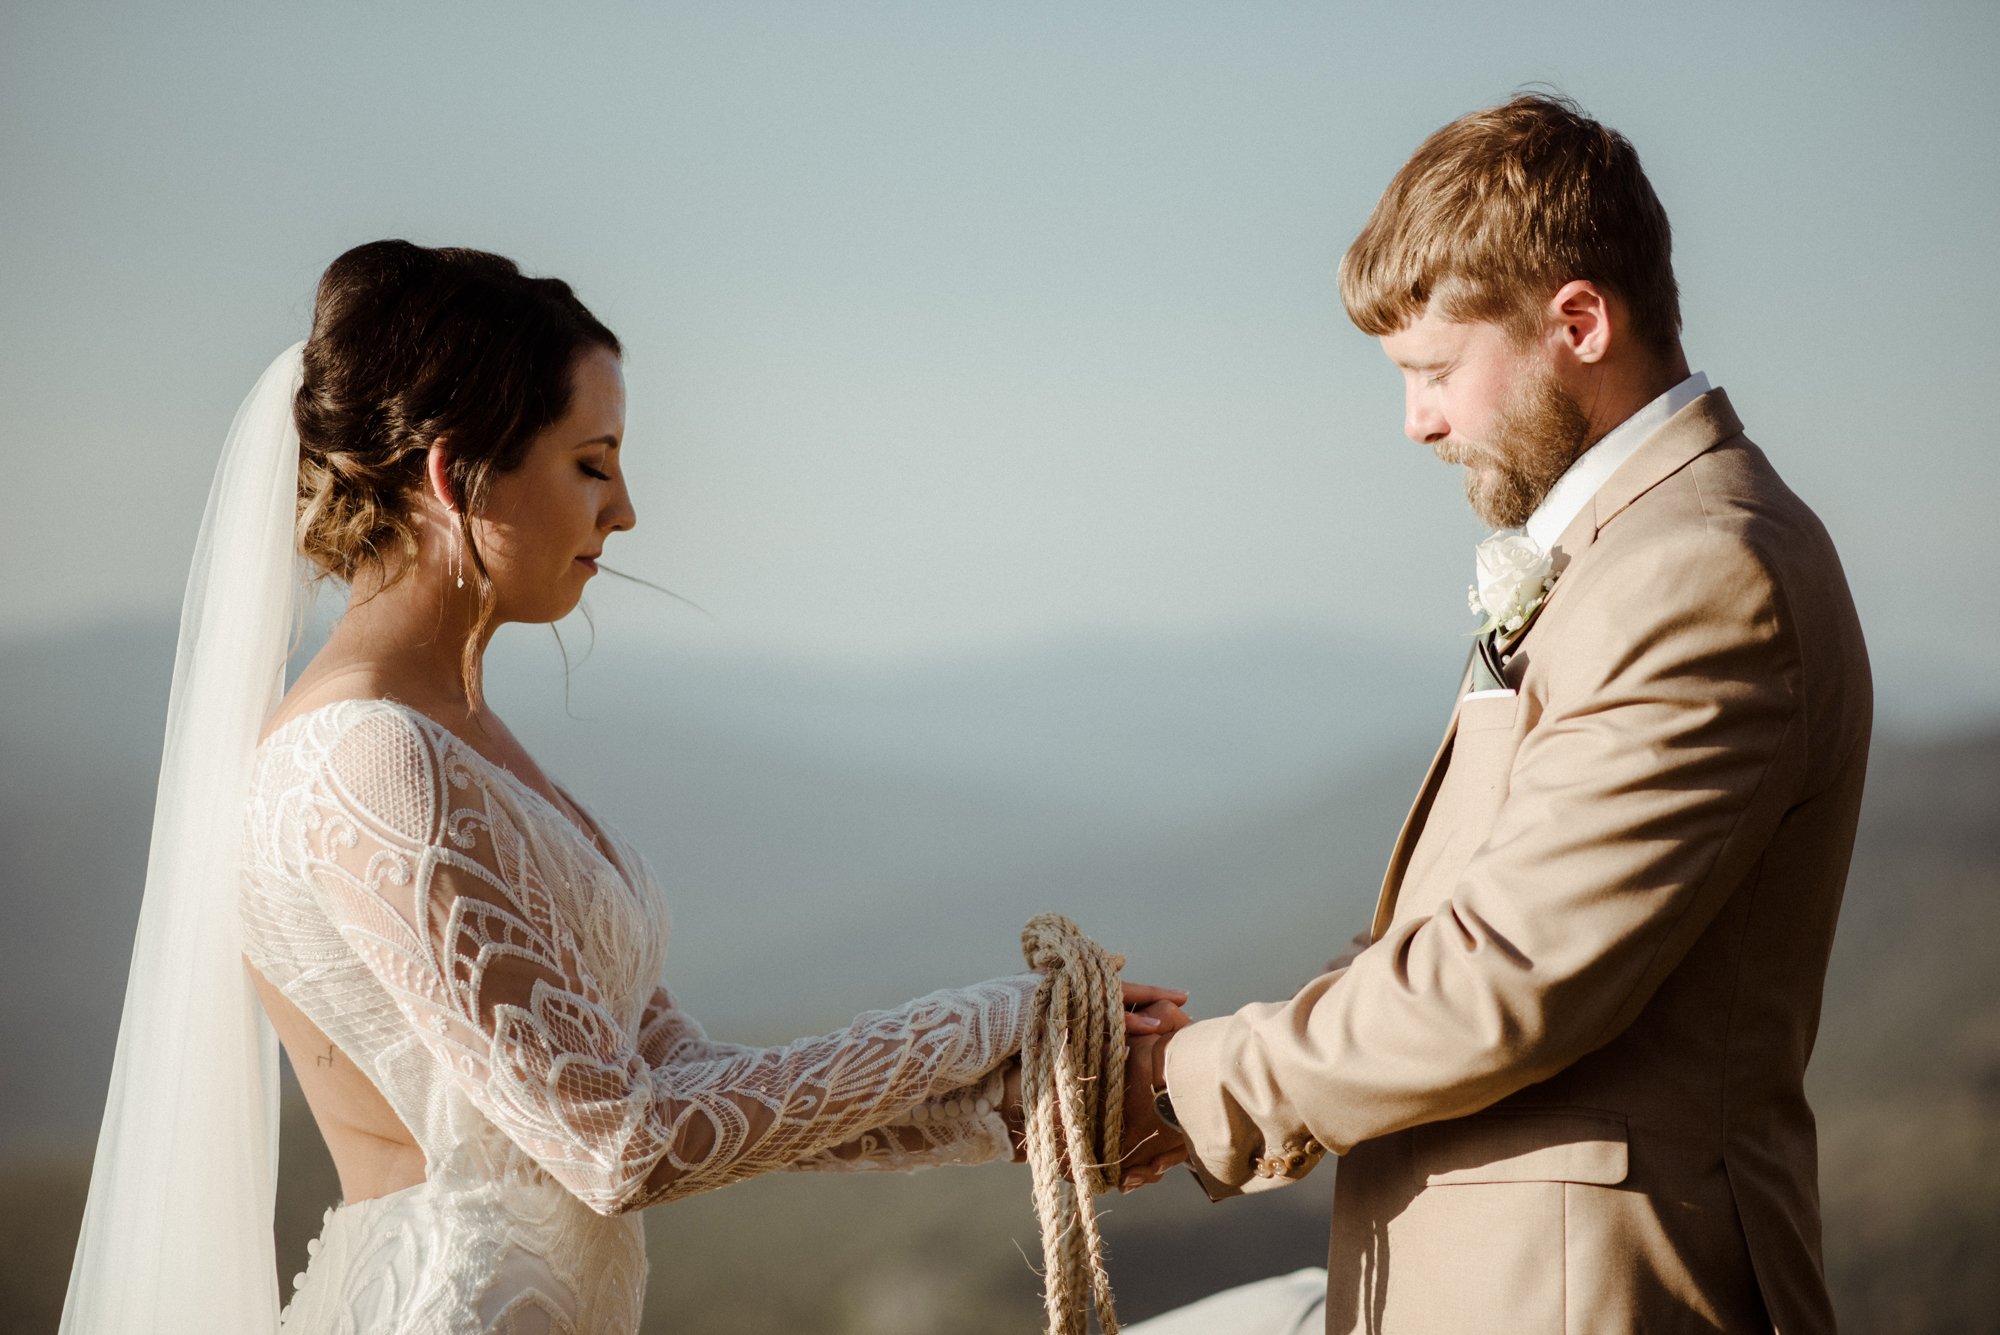 Sunset Elopement on Stony Man Summit in Shenandoah National Park - White Sails Creative Elopement Photography - July Elopement on the Blue Ridge Parkway_30.jpg